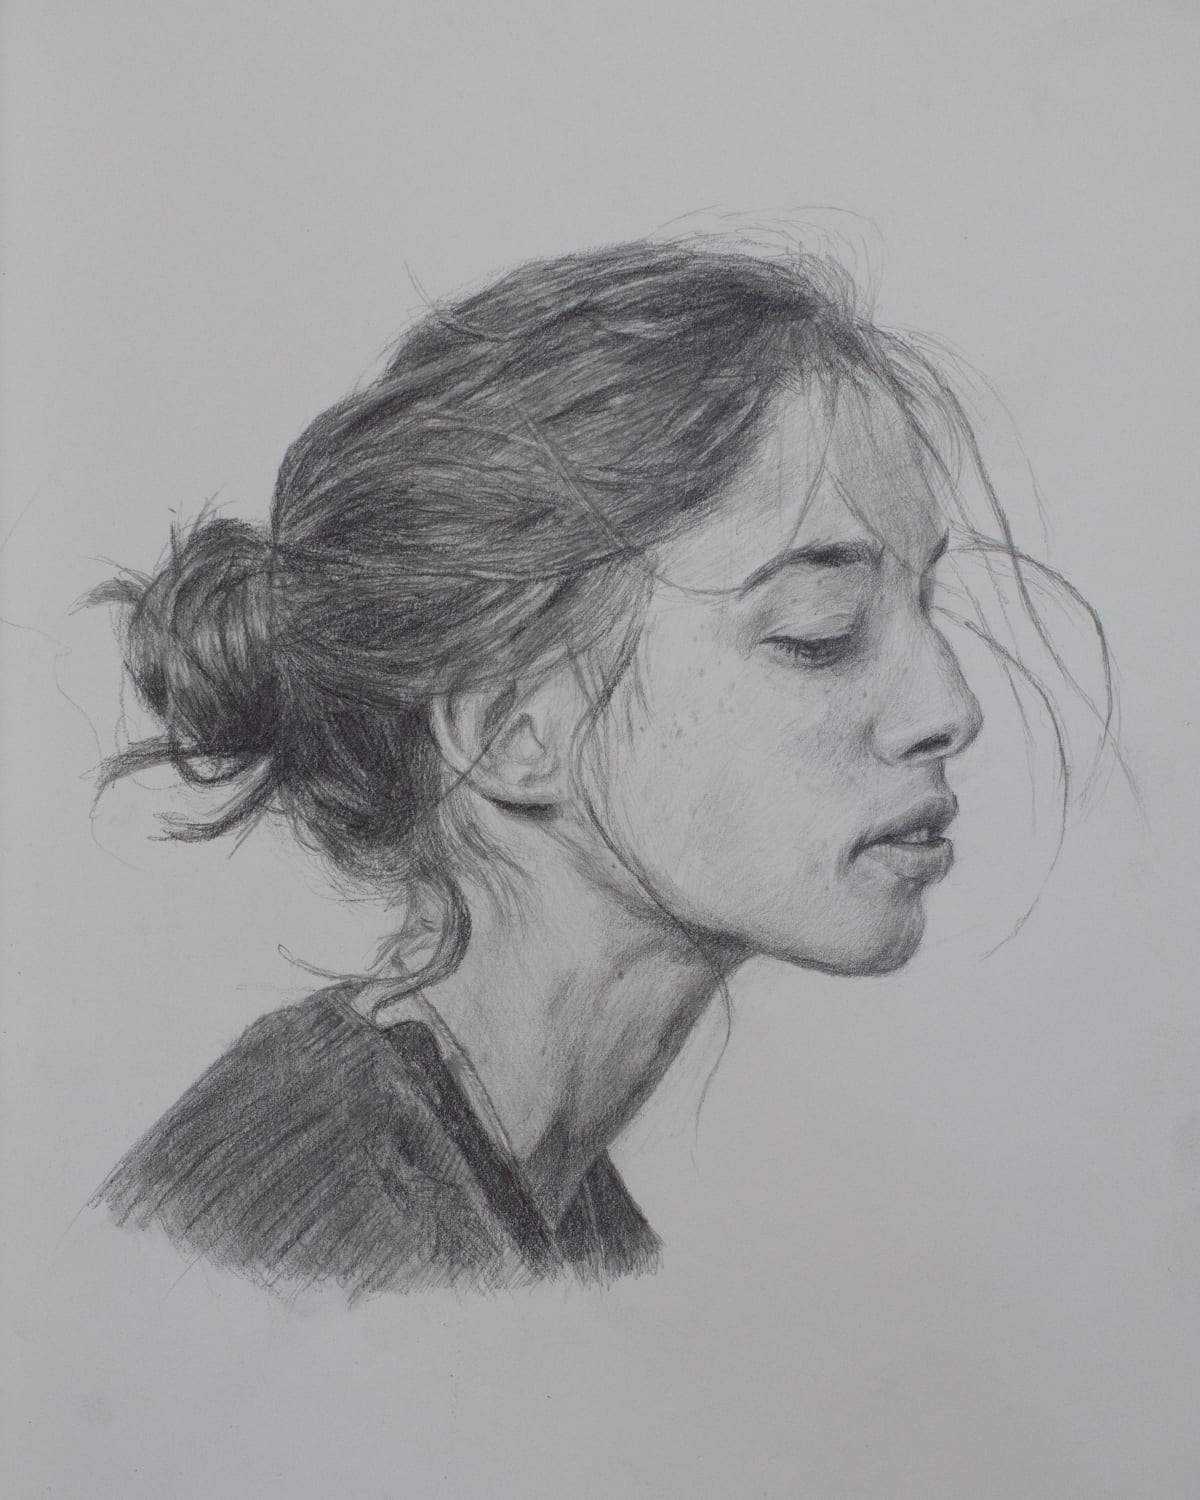 Did a portrait in profile to get a bit out of my comfort zone.